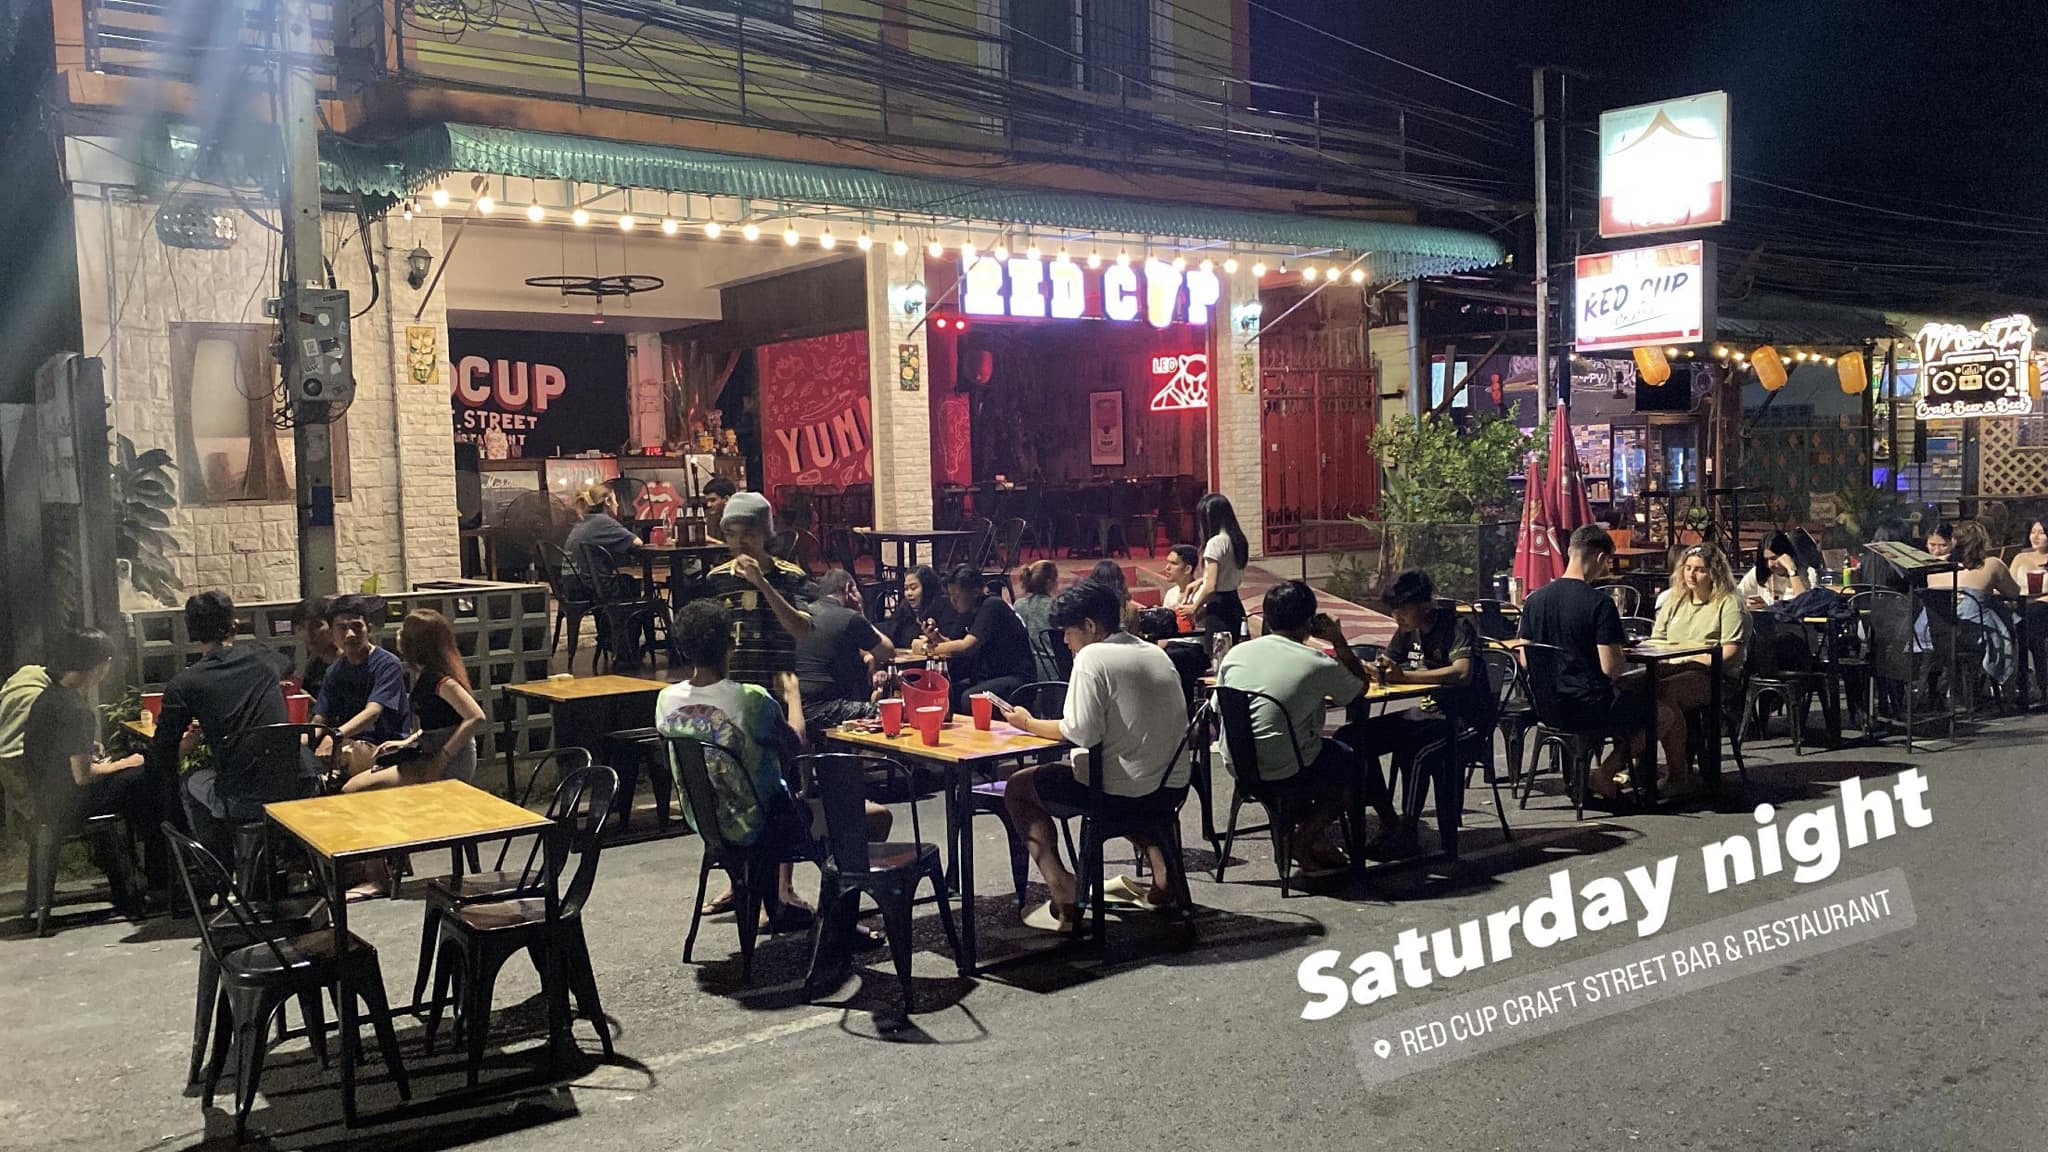 Red Cup Craft Street Bar & Restaurant (Red Cup Craft Street Bar & Restaurant) : พระนครศรีอยุธยา (Phra Nakhon Si Ayutthaya)